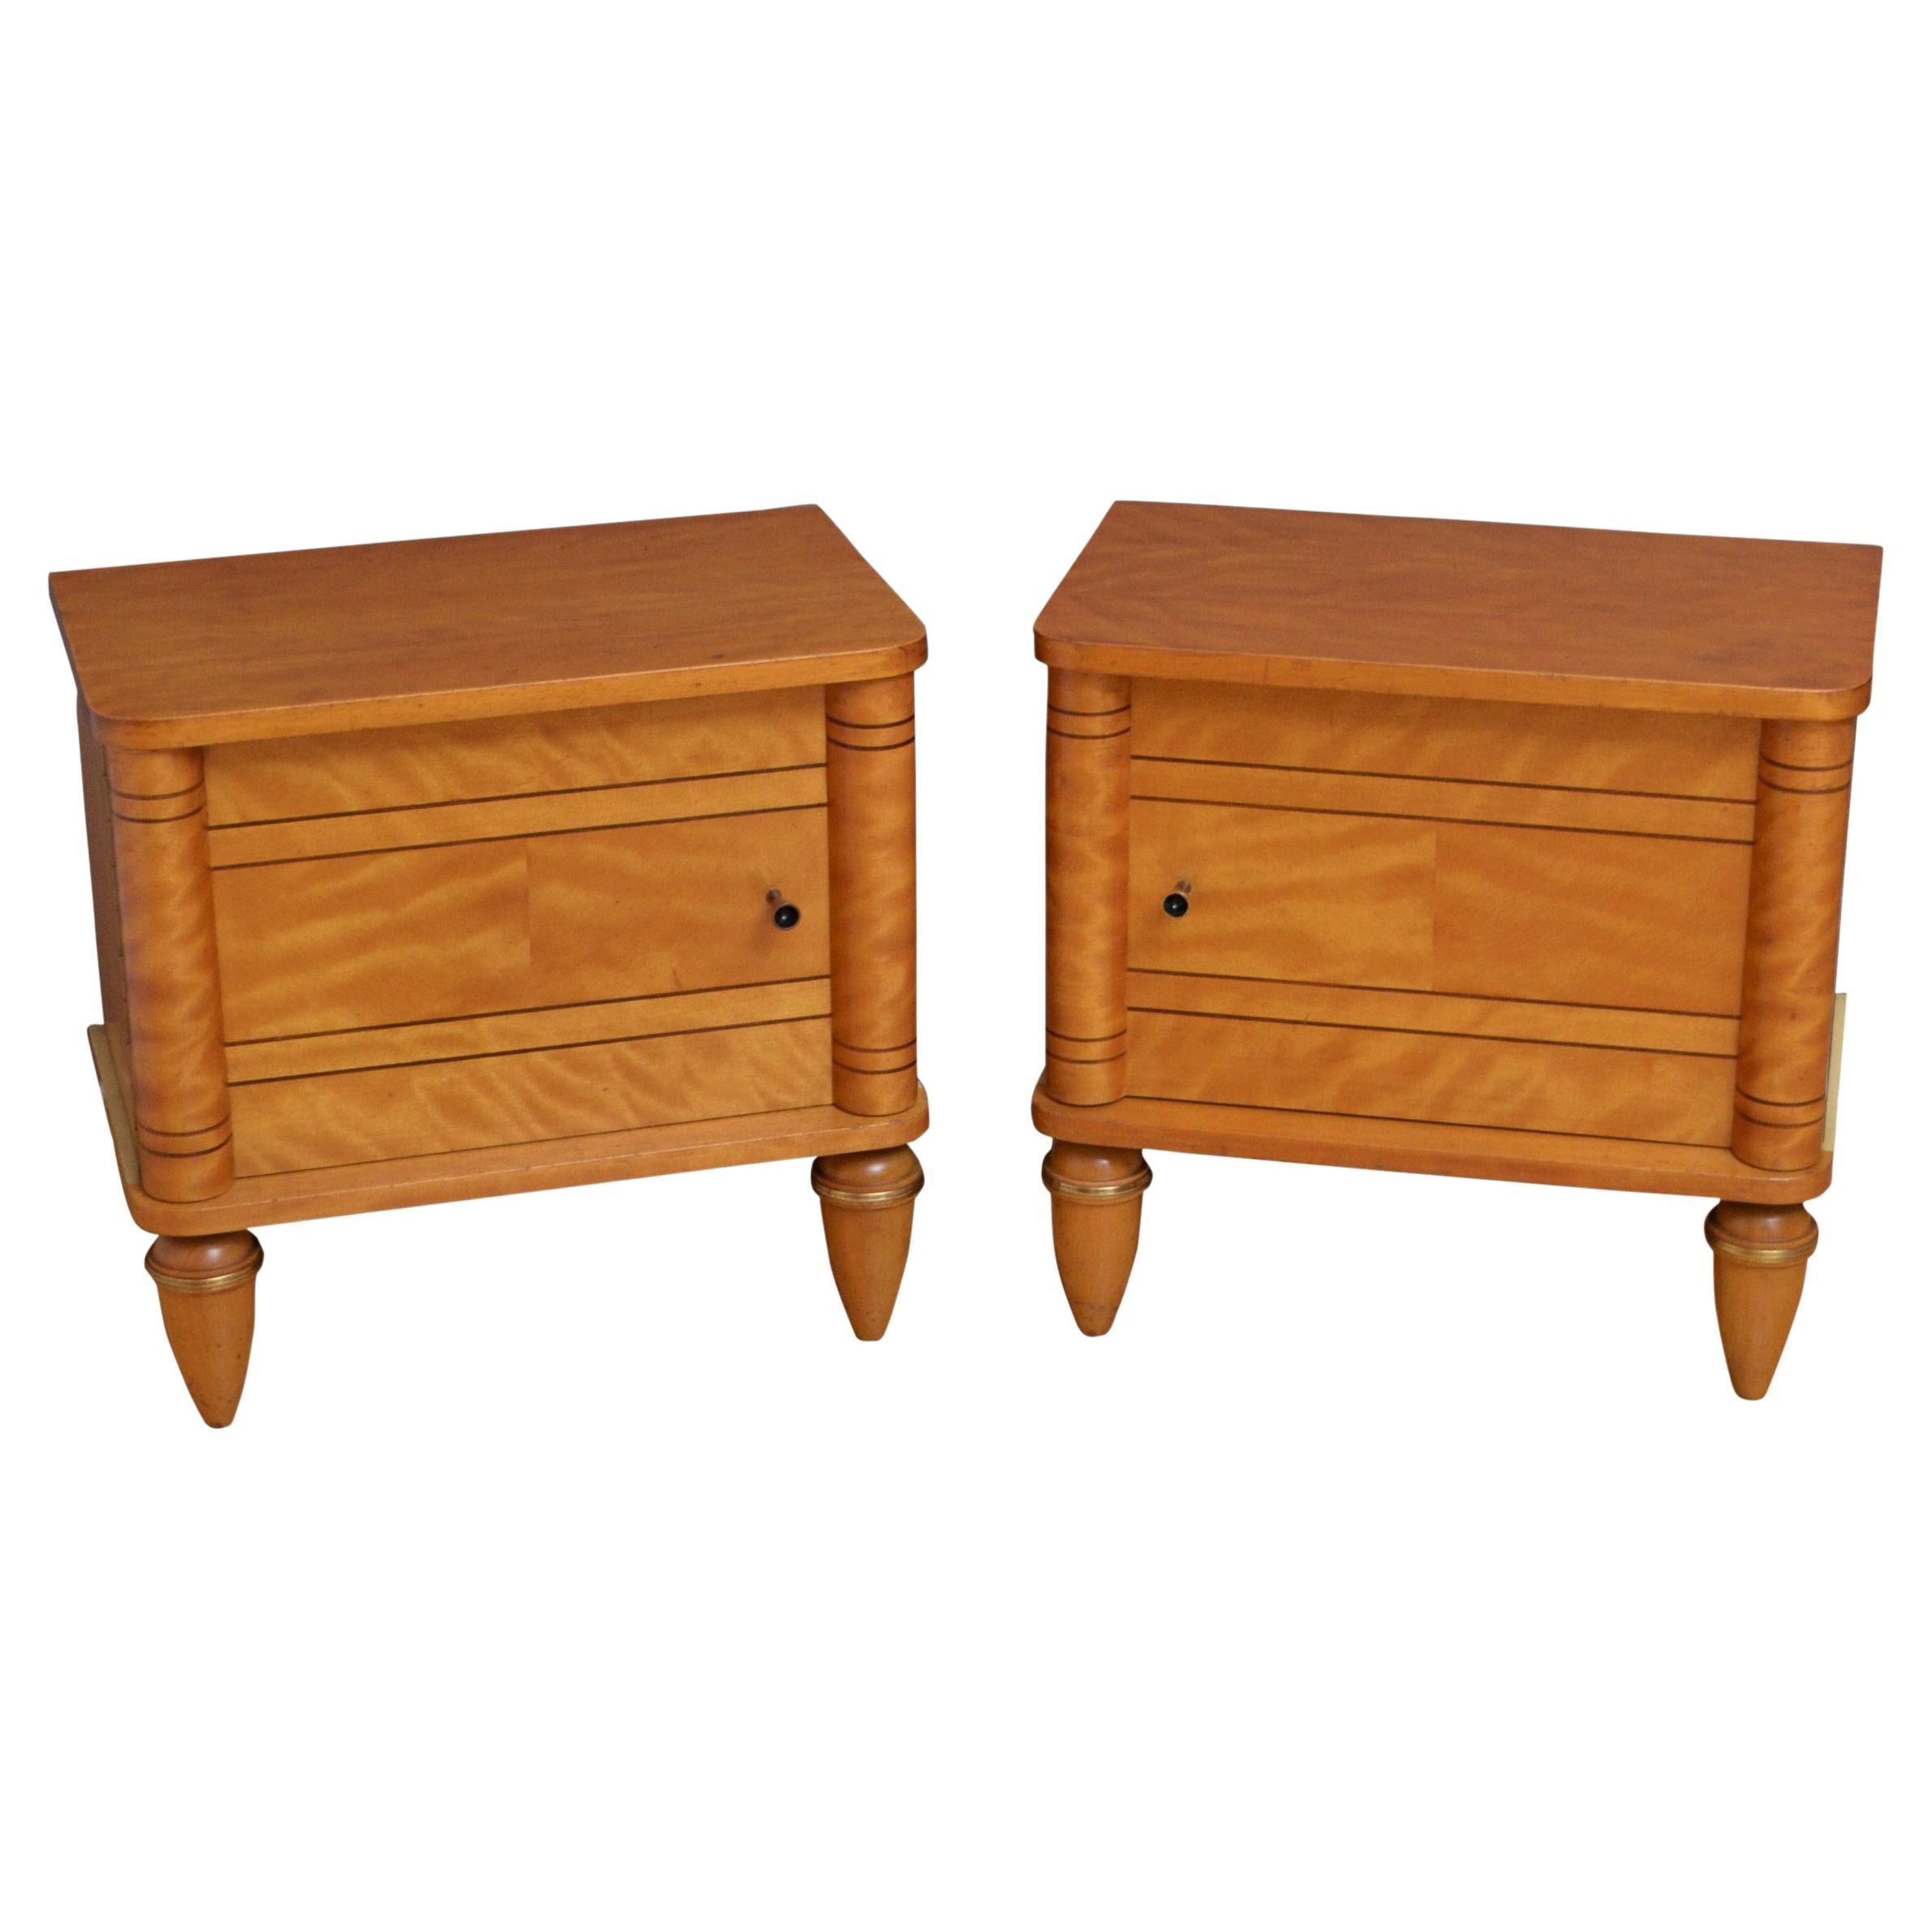 Pair of French Art Deco Low Bedside Cabinets